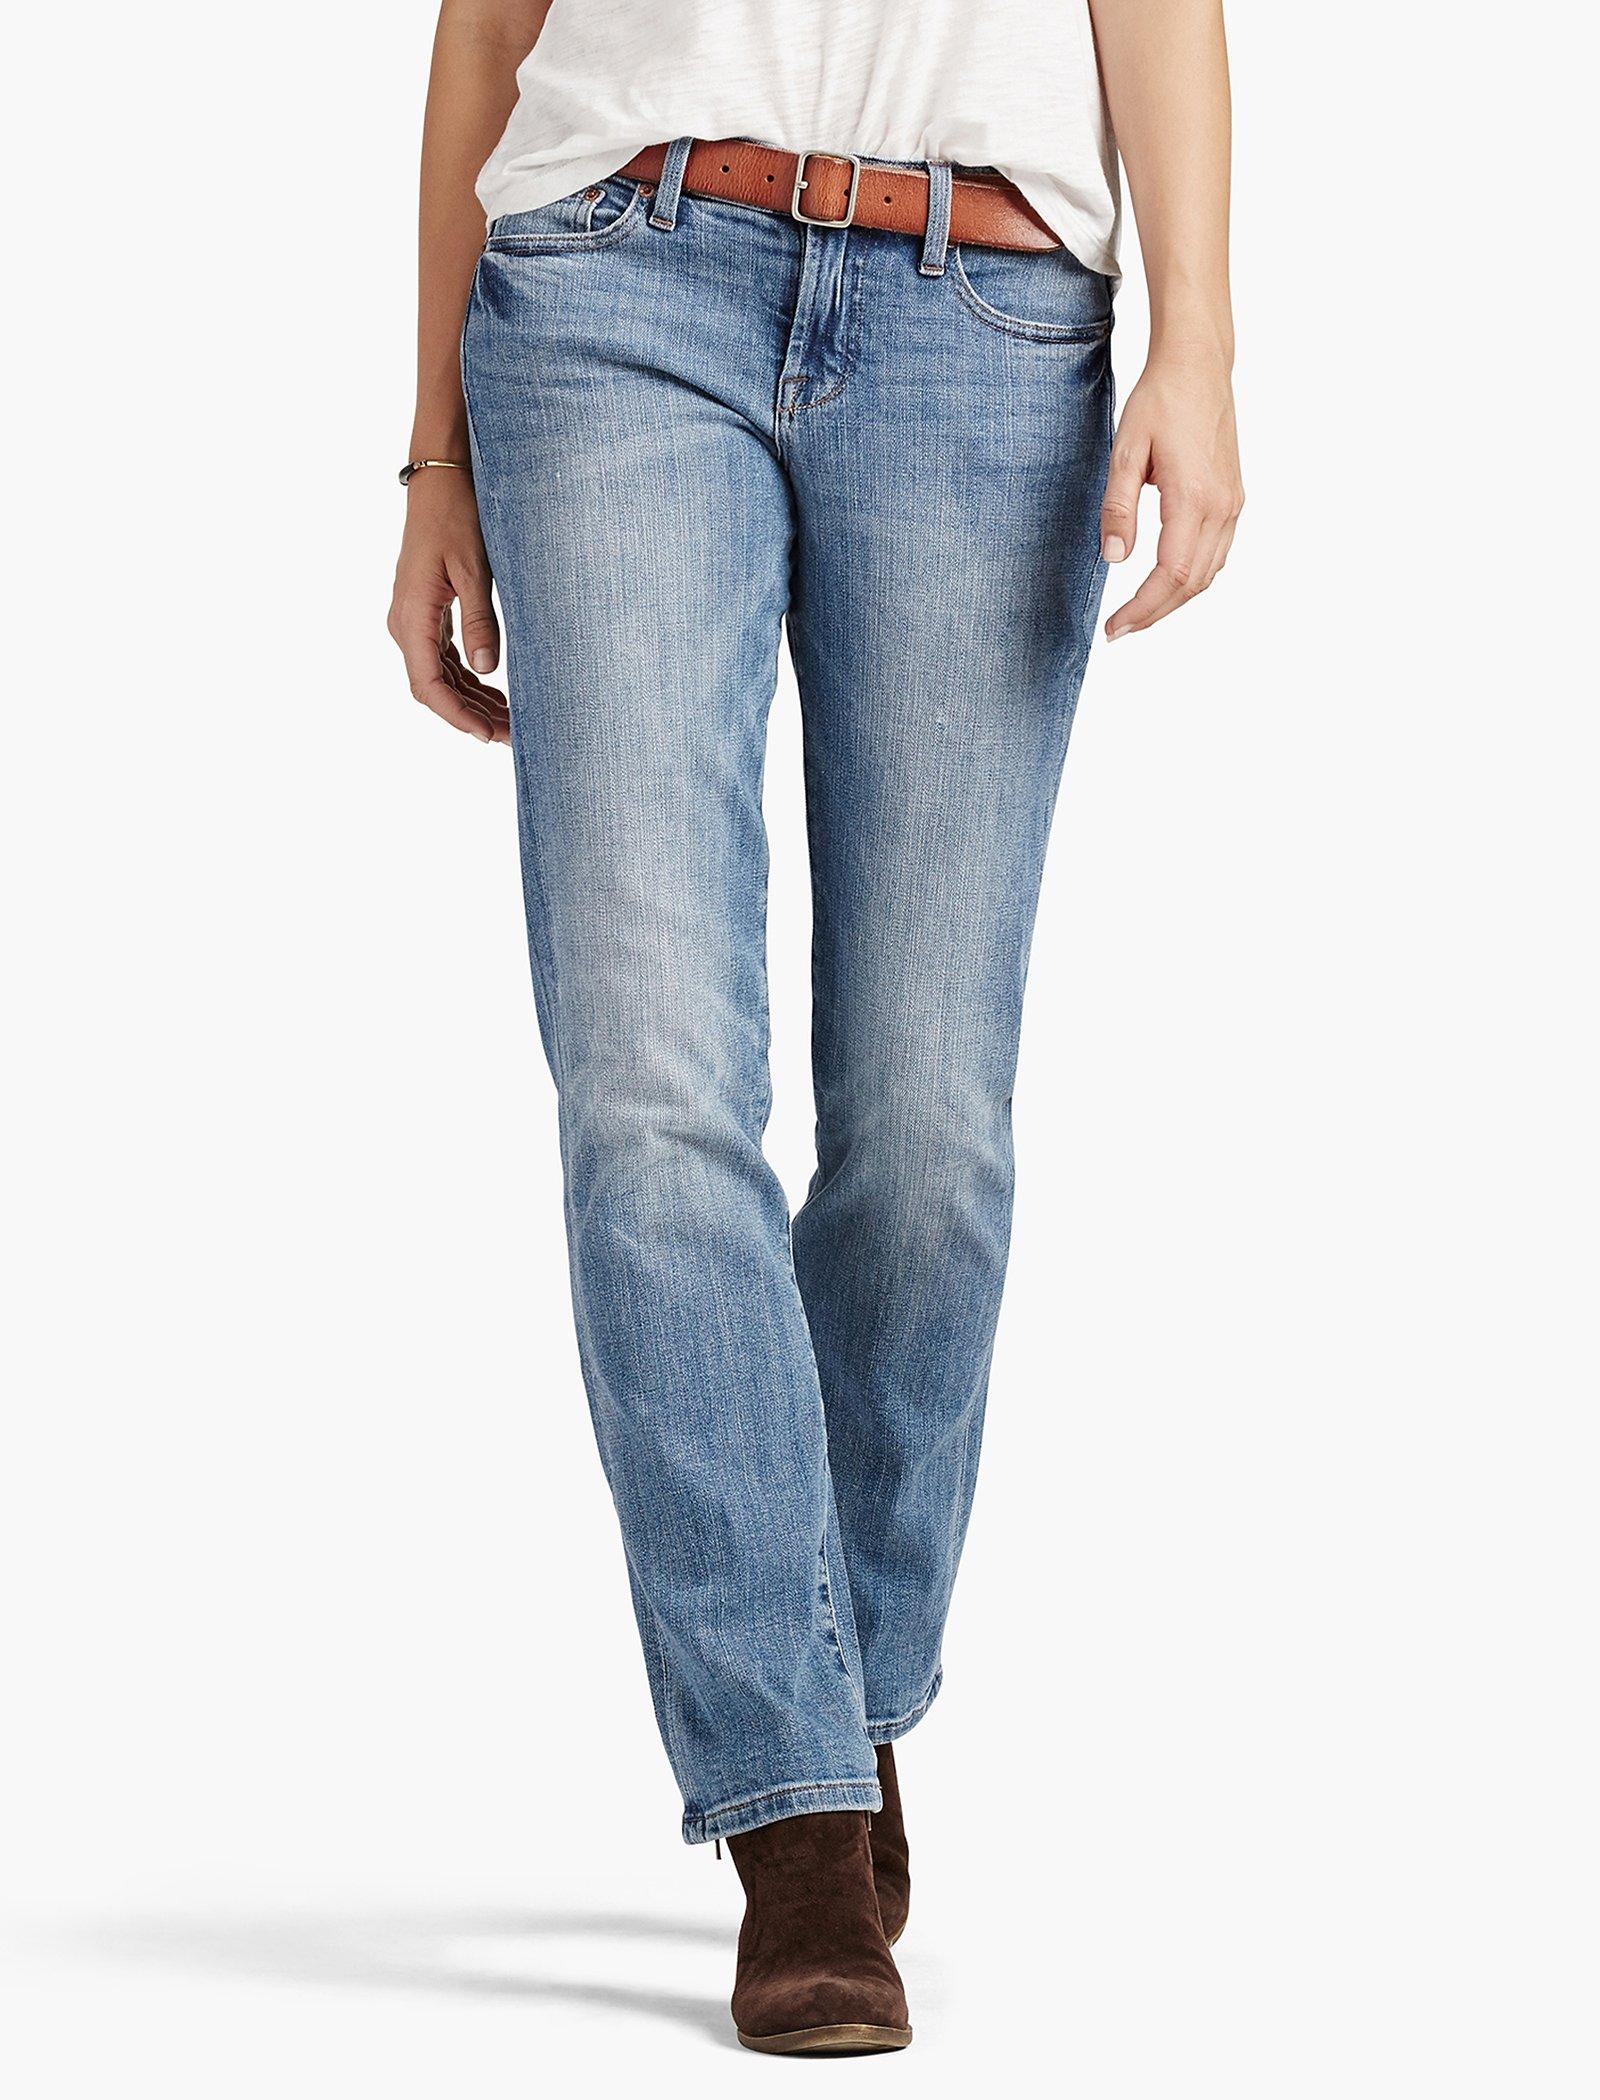 EASY RIDER RELAXED BOOTCUT JEAN IN DANVILLE | Lucky Brand